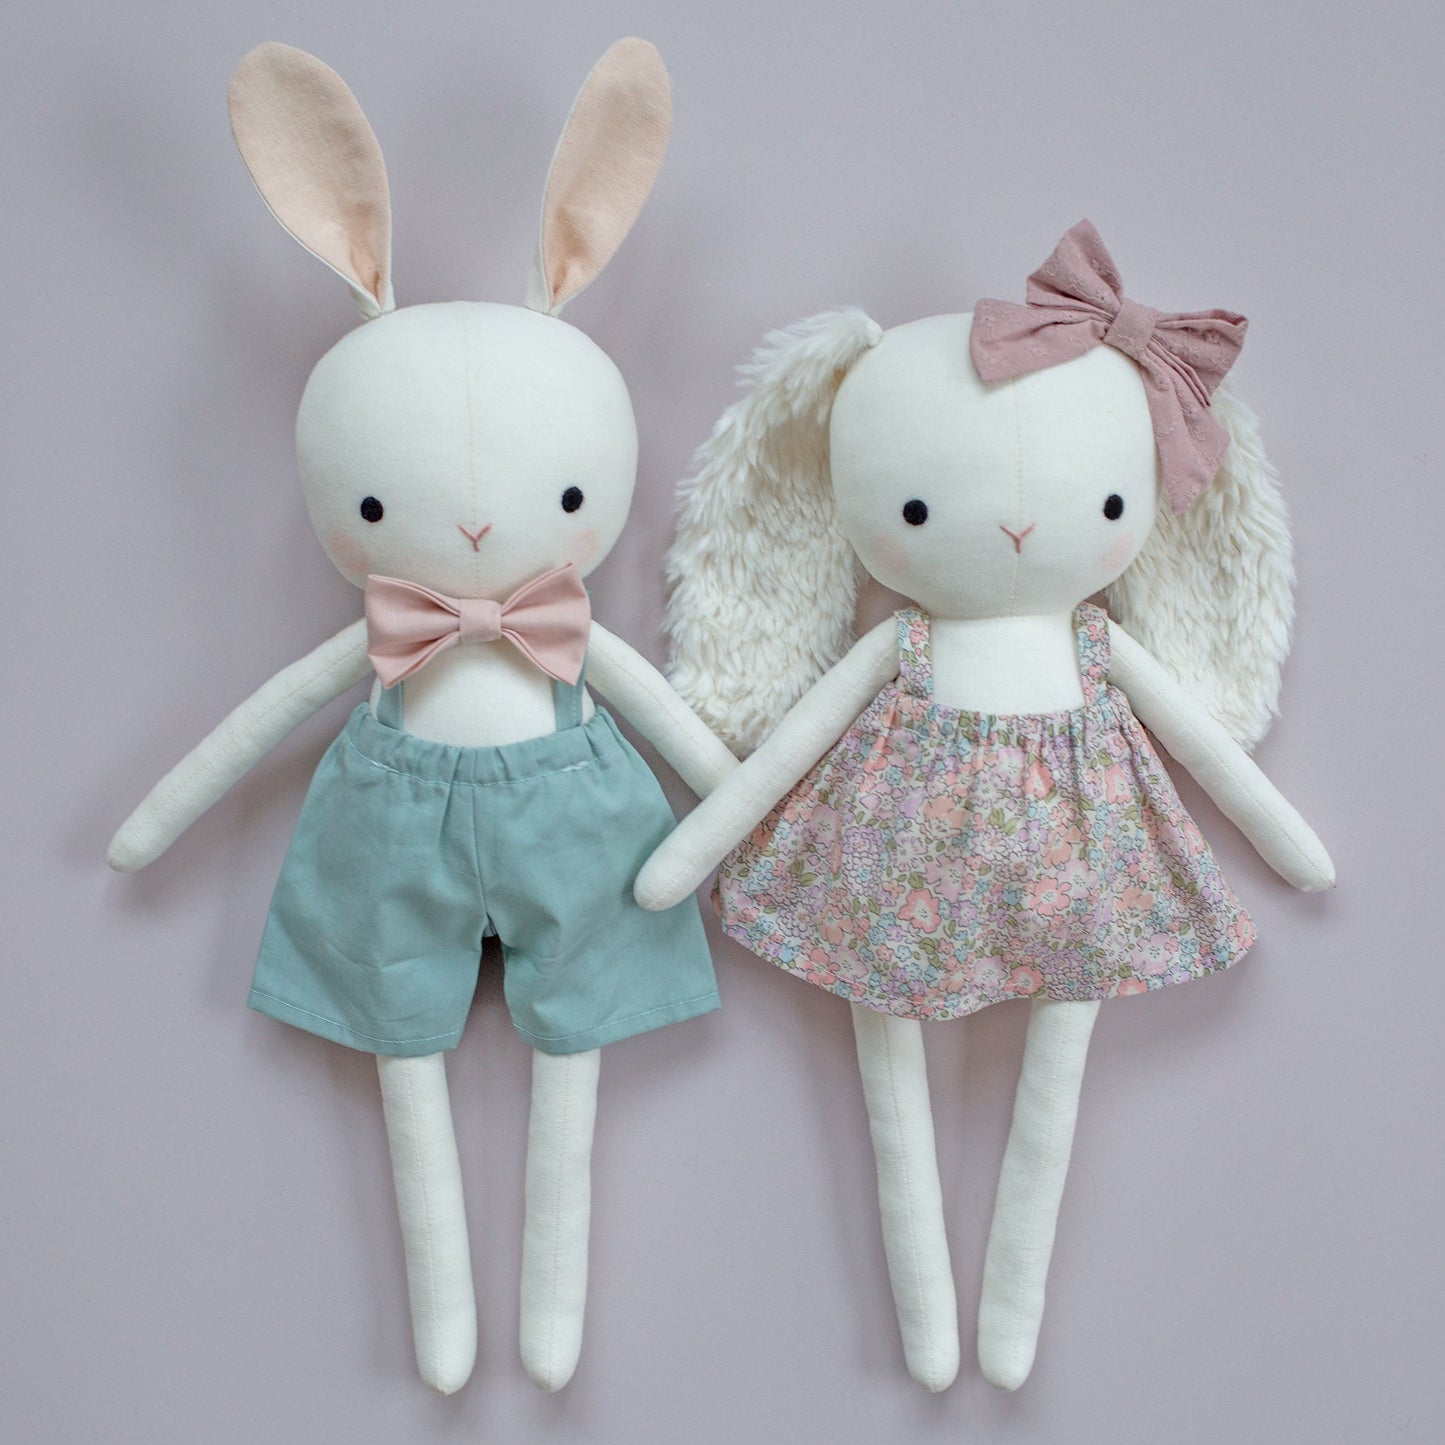 Bunny sewing pattern and tutorial - Studio Seren